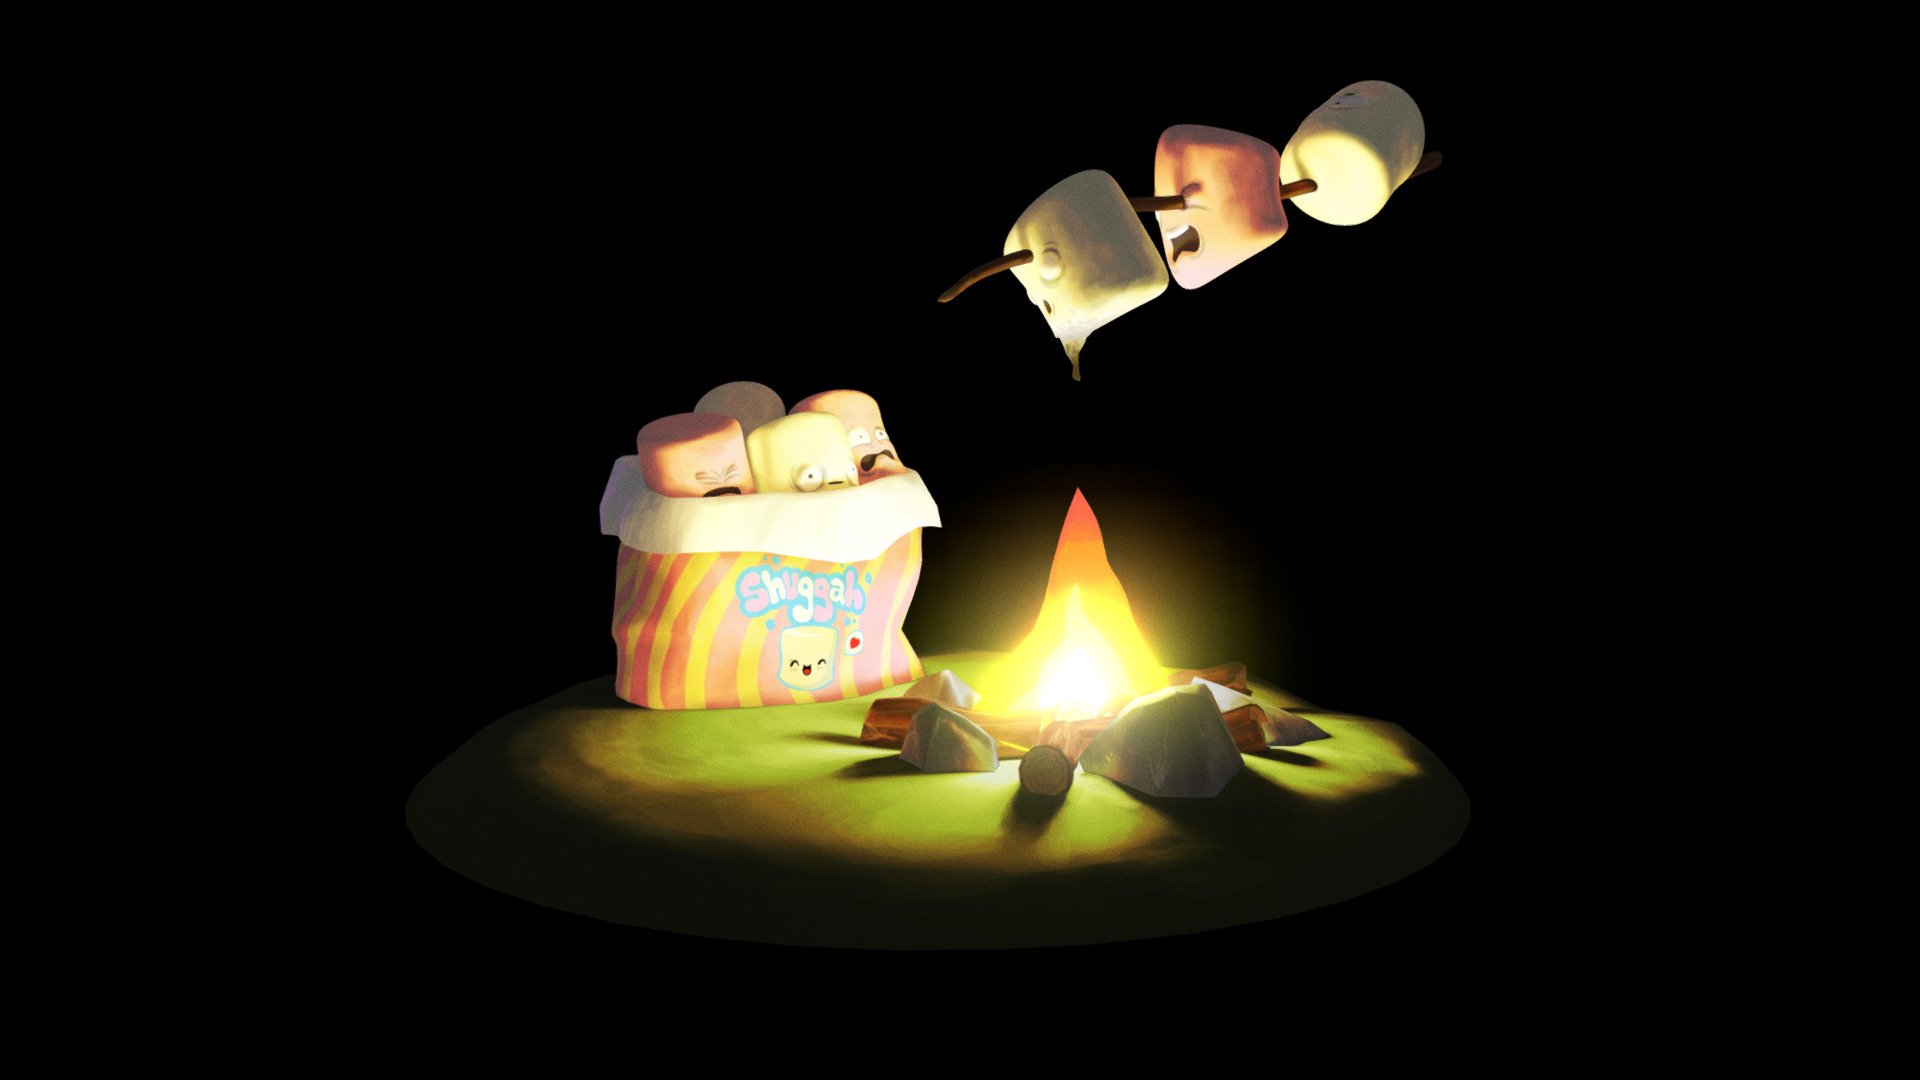 Hello,
Here my entry for the  #DiscordFoodCharacter

Marshmallows_in_hell: the creepy end&hellip;

Modeling/painting done in #Blender

Based on a original concept art of Loga 
https://www.instagram.com/logartiste/?hl=fr
https://www.youtube.com/channel/UCsqlp9oe-5hpdKMailvJZLQ - #DiscordFoodCharacter  Marshmallows_in_hell - Download Free 3D model by B3N023 3d model